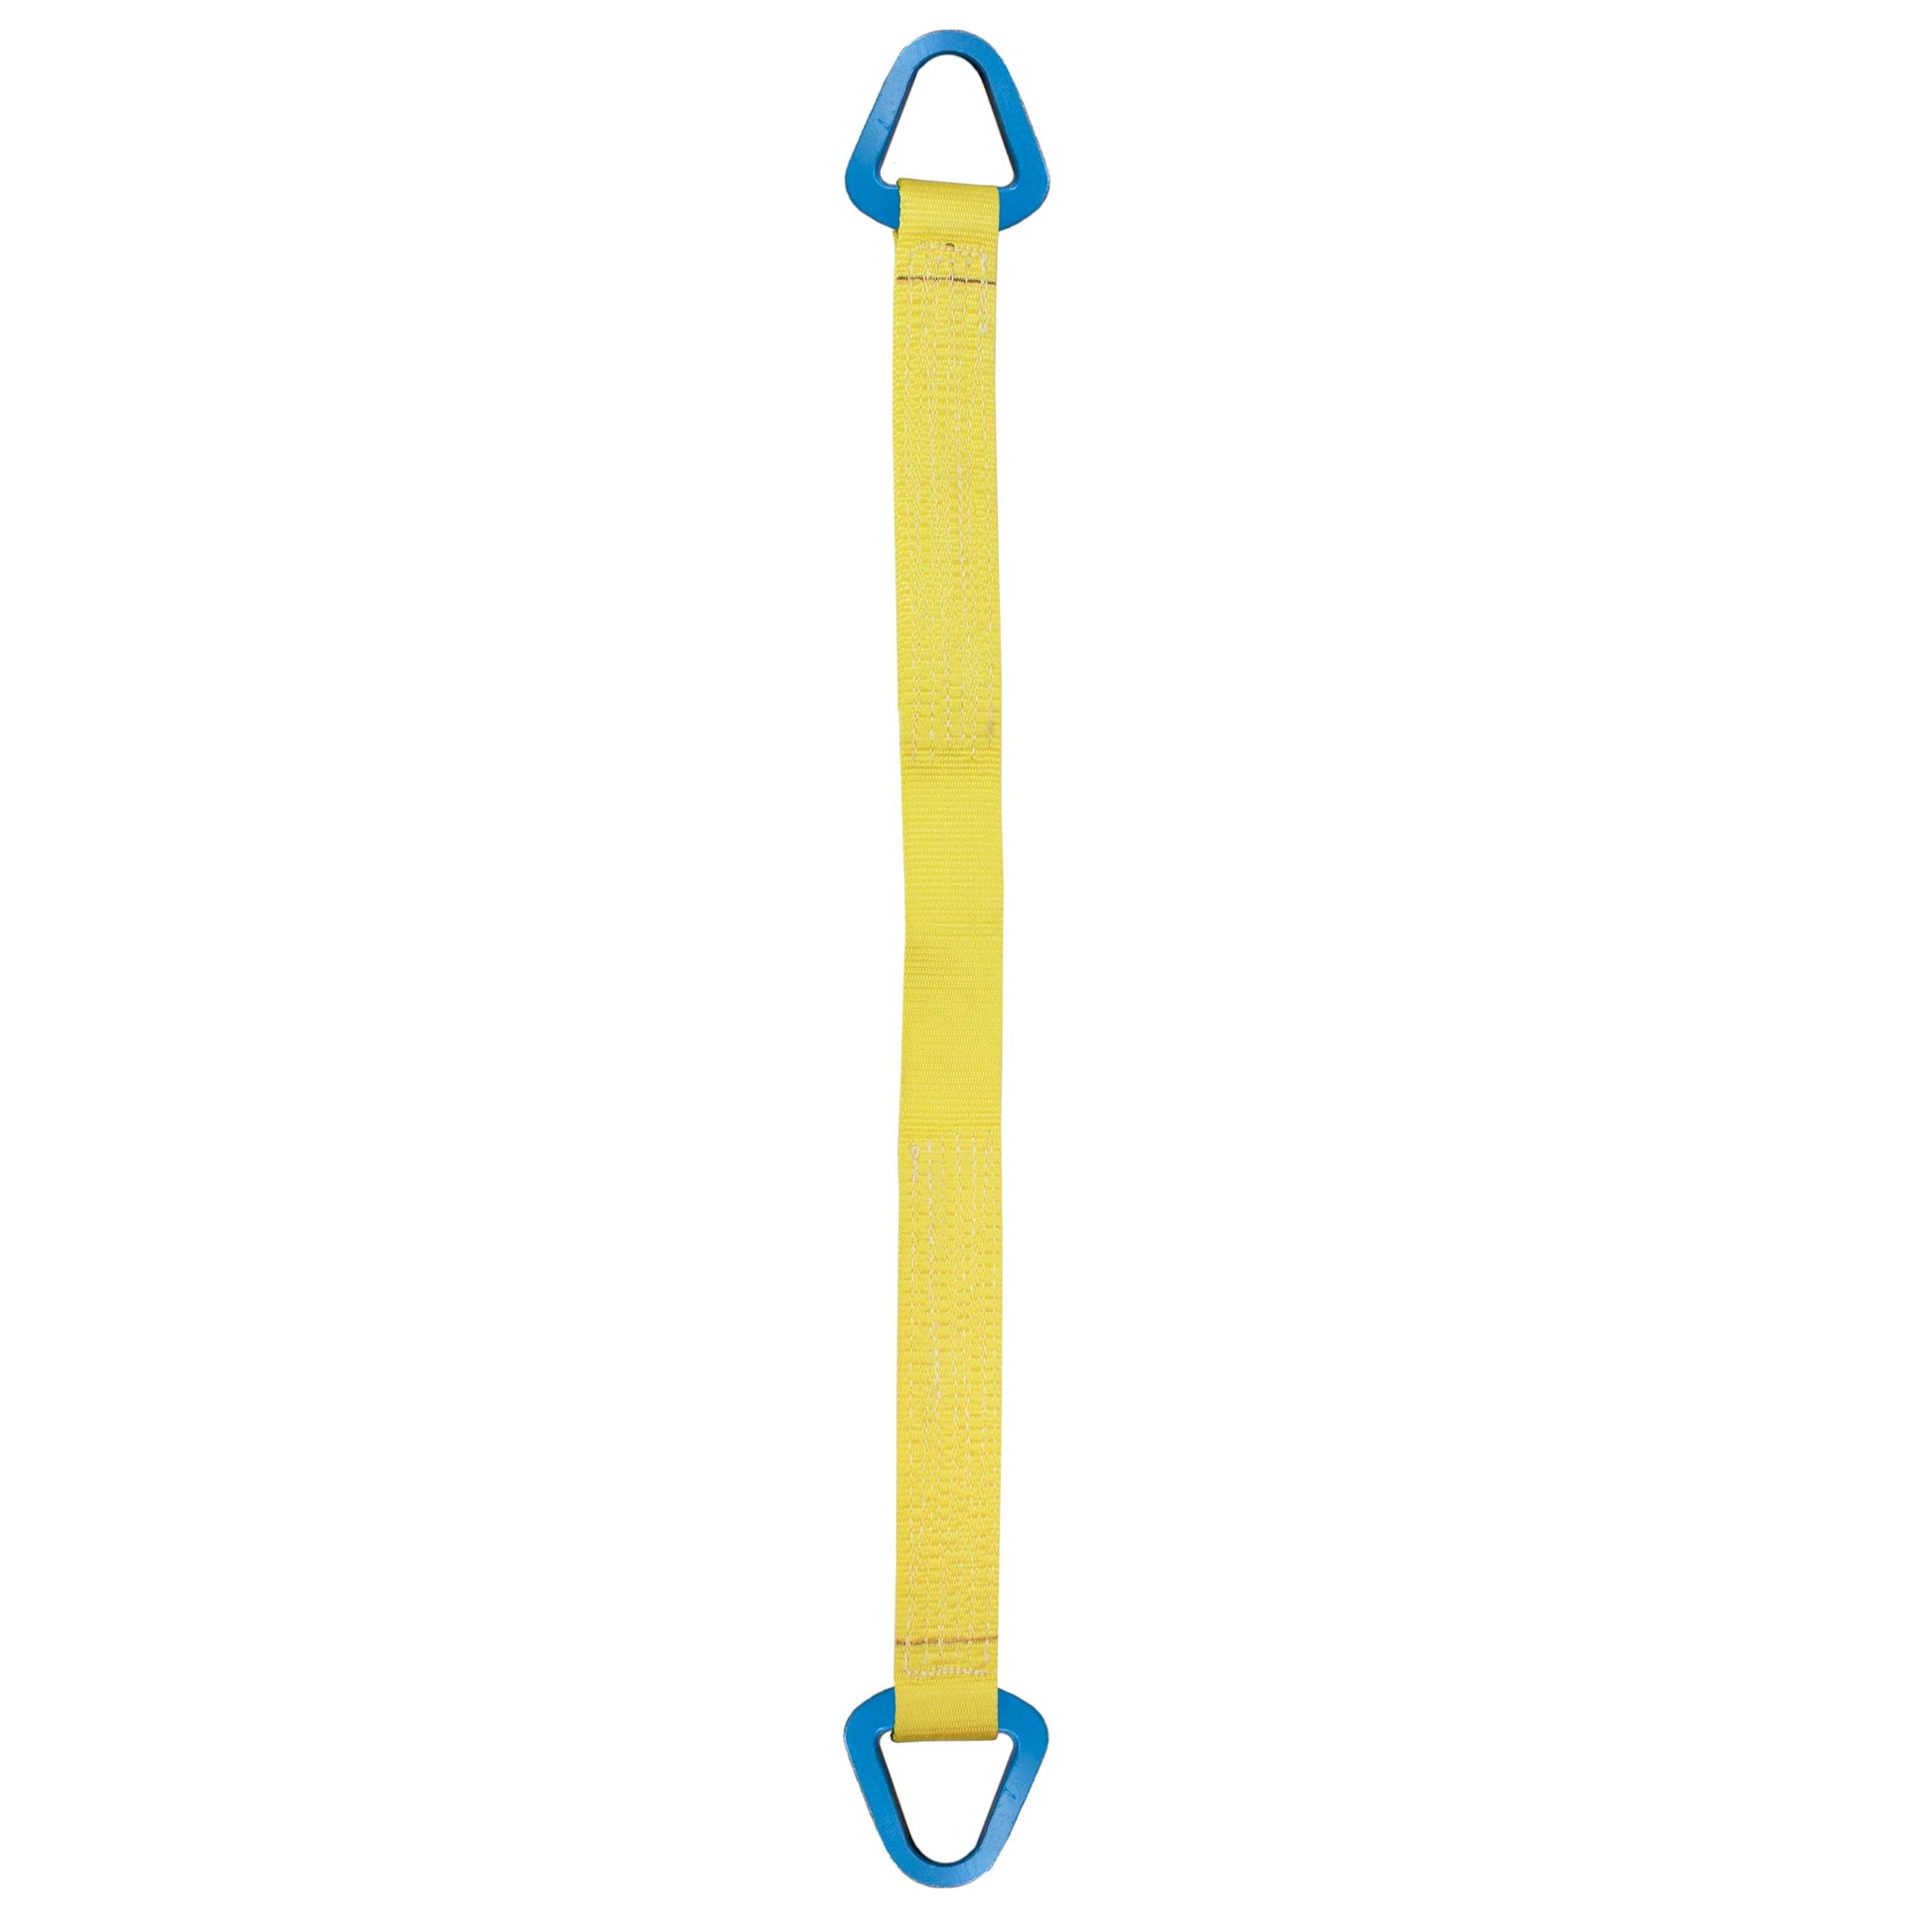 Nylon Lifting Sling Triangle 3 inch x 16 foot 1ply image 1 of 2